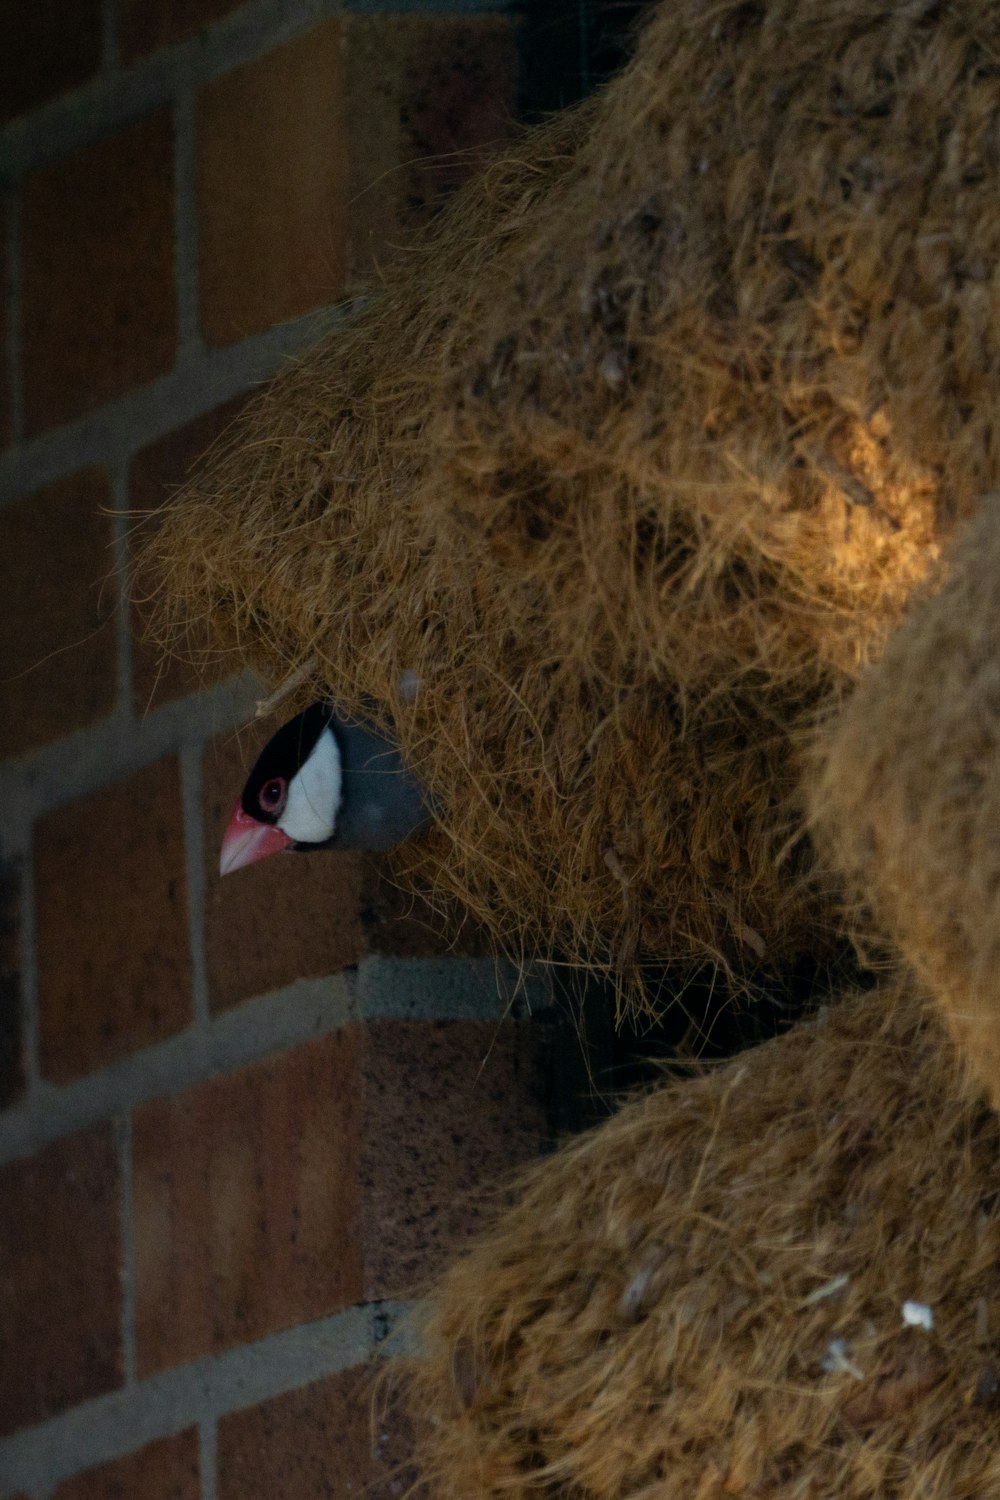 a bird sitting on top of a pile of hay